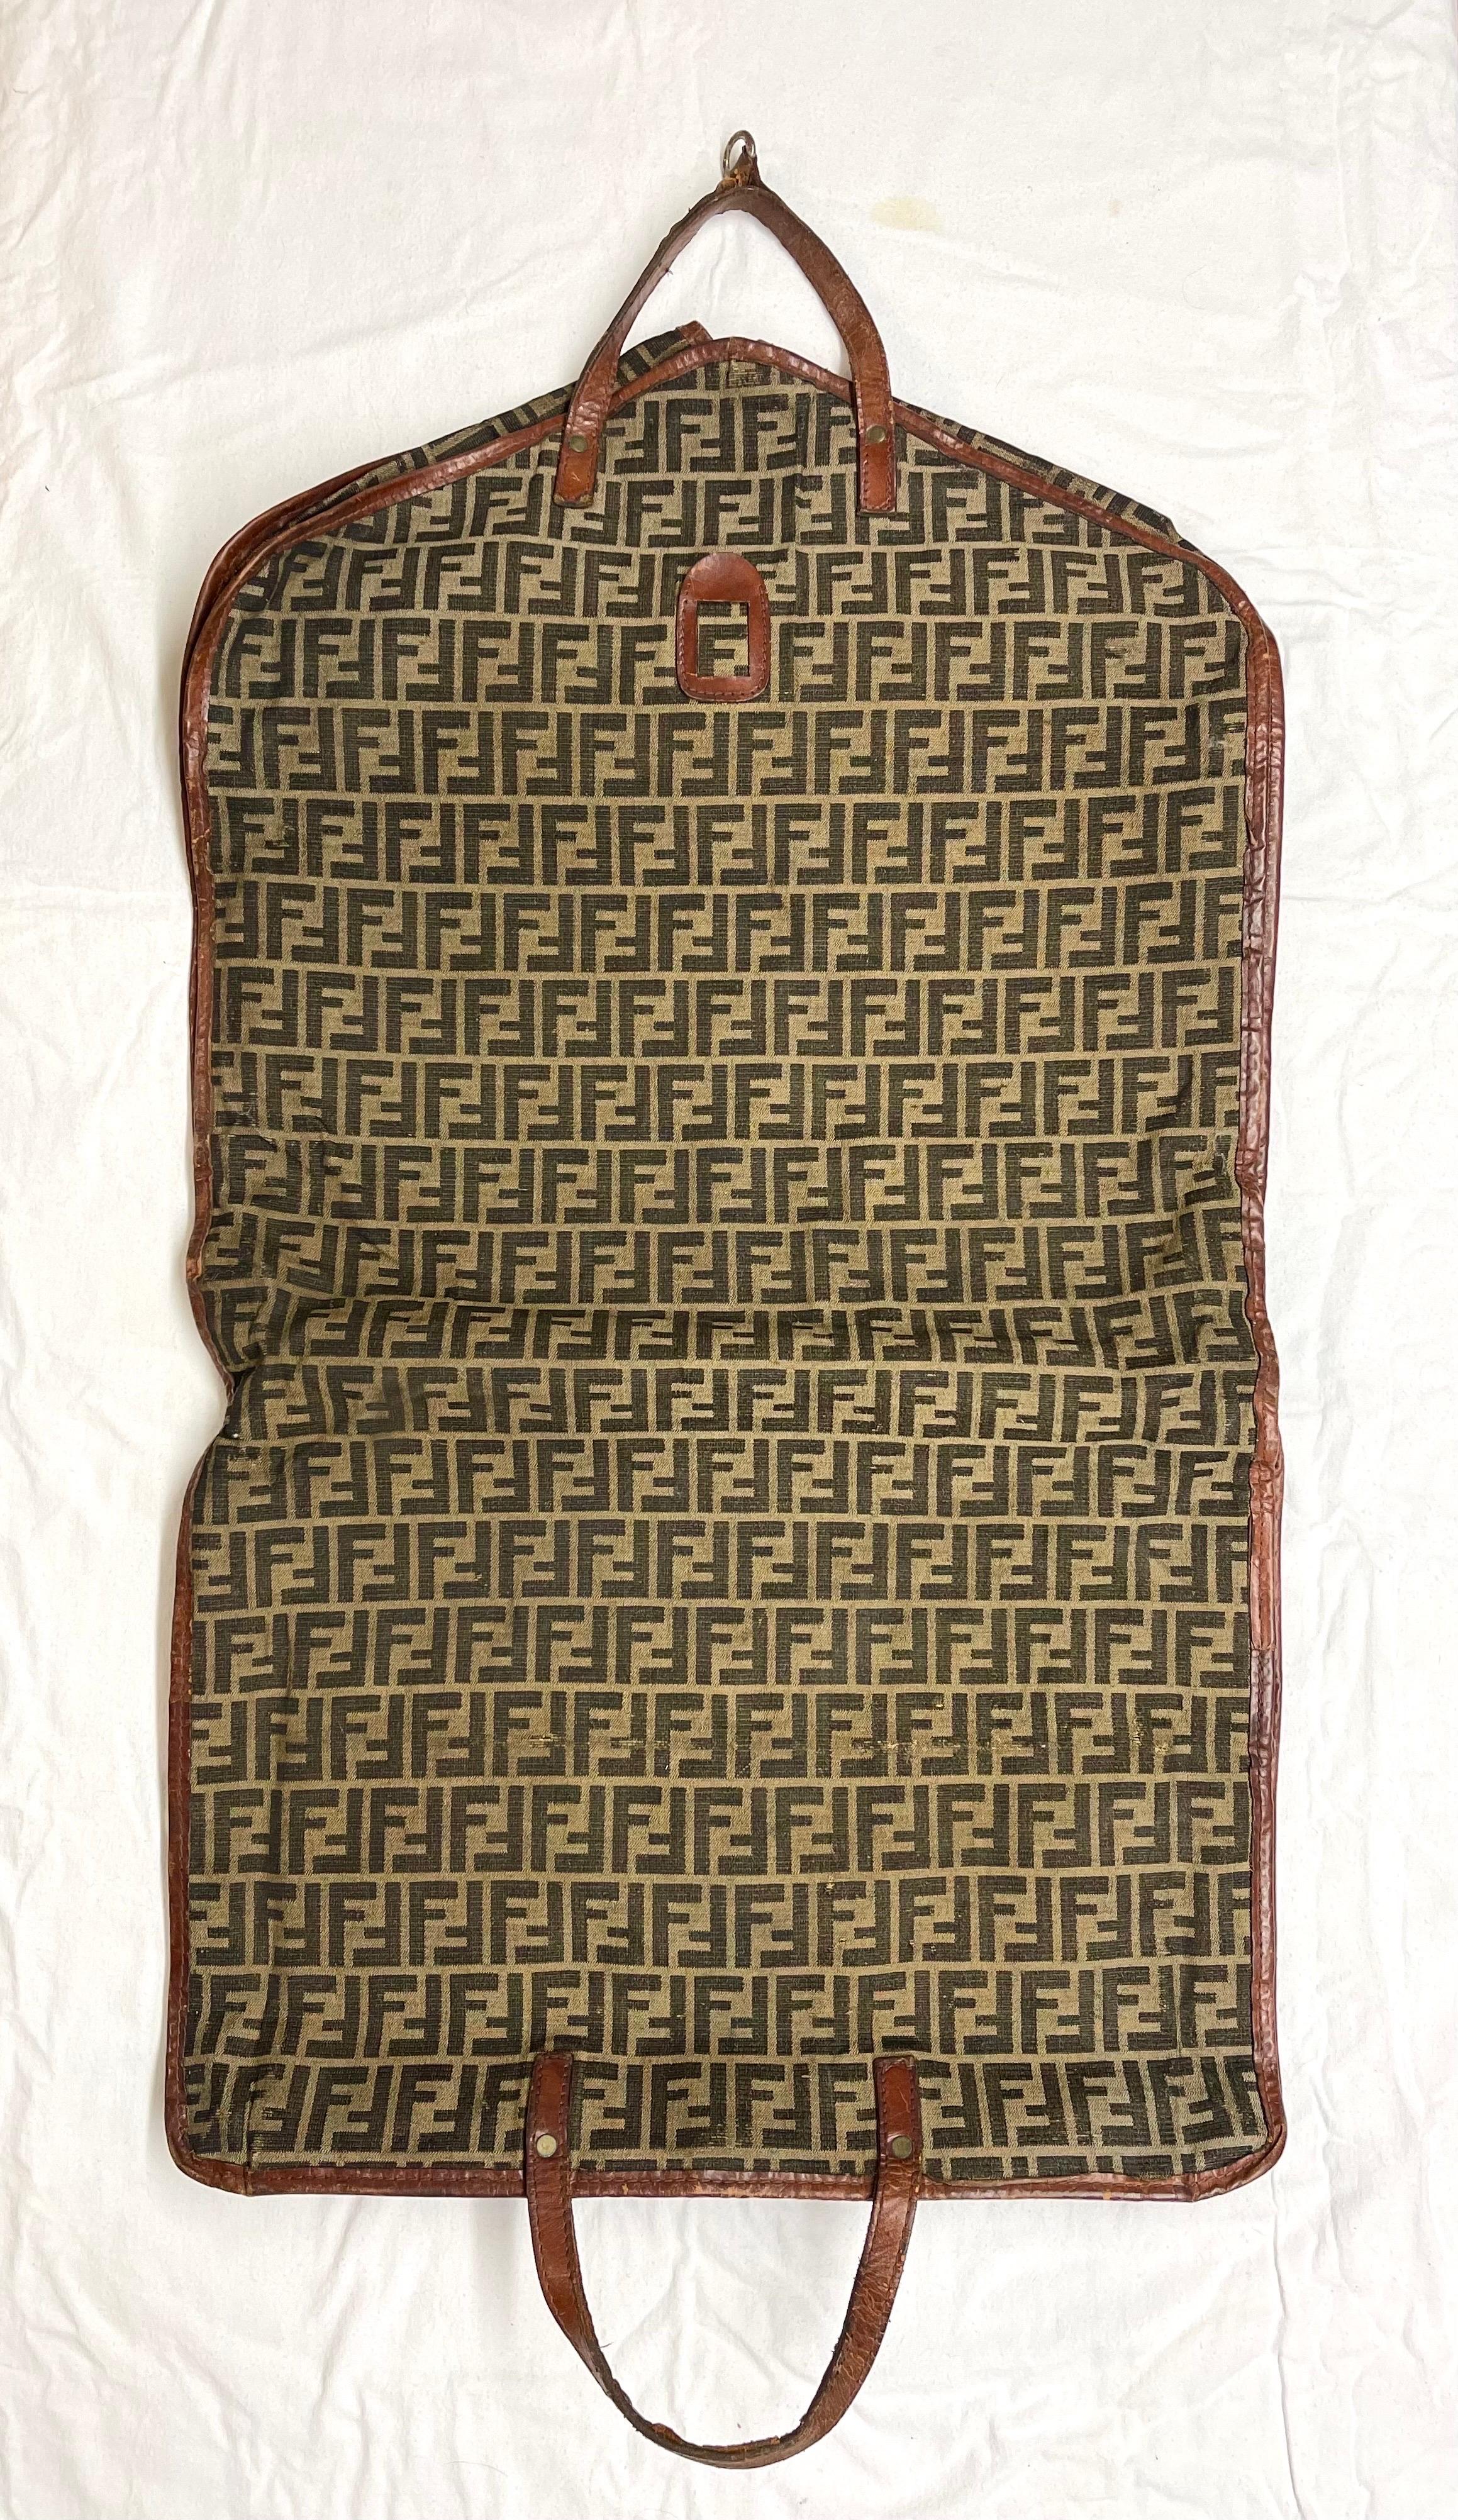 Rare Vintage Fendi Zucca Monogram Garment Travel Carrier. Classic Zucca FF  monogram pattern on brown and Tan Canvas with leather trim. Perfect for that world traveler fashionista. 
Measures approx.: 44